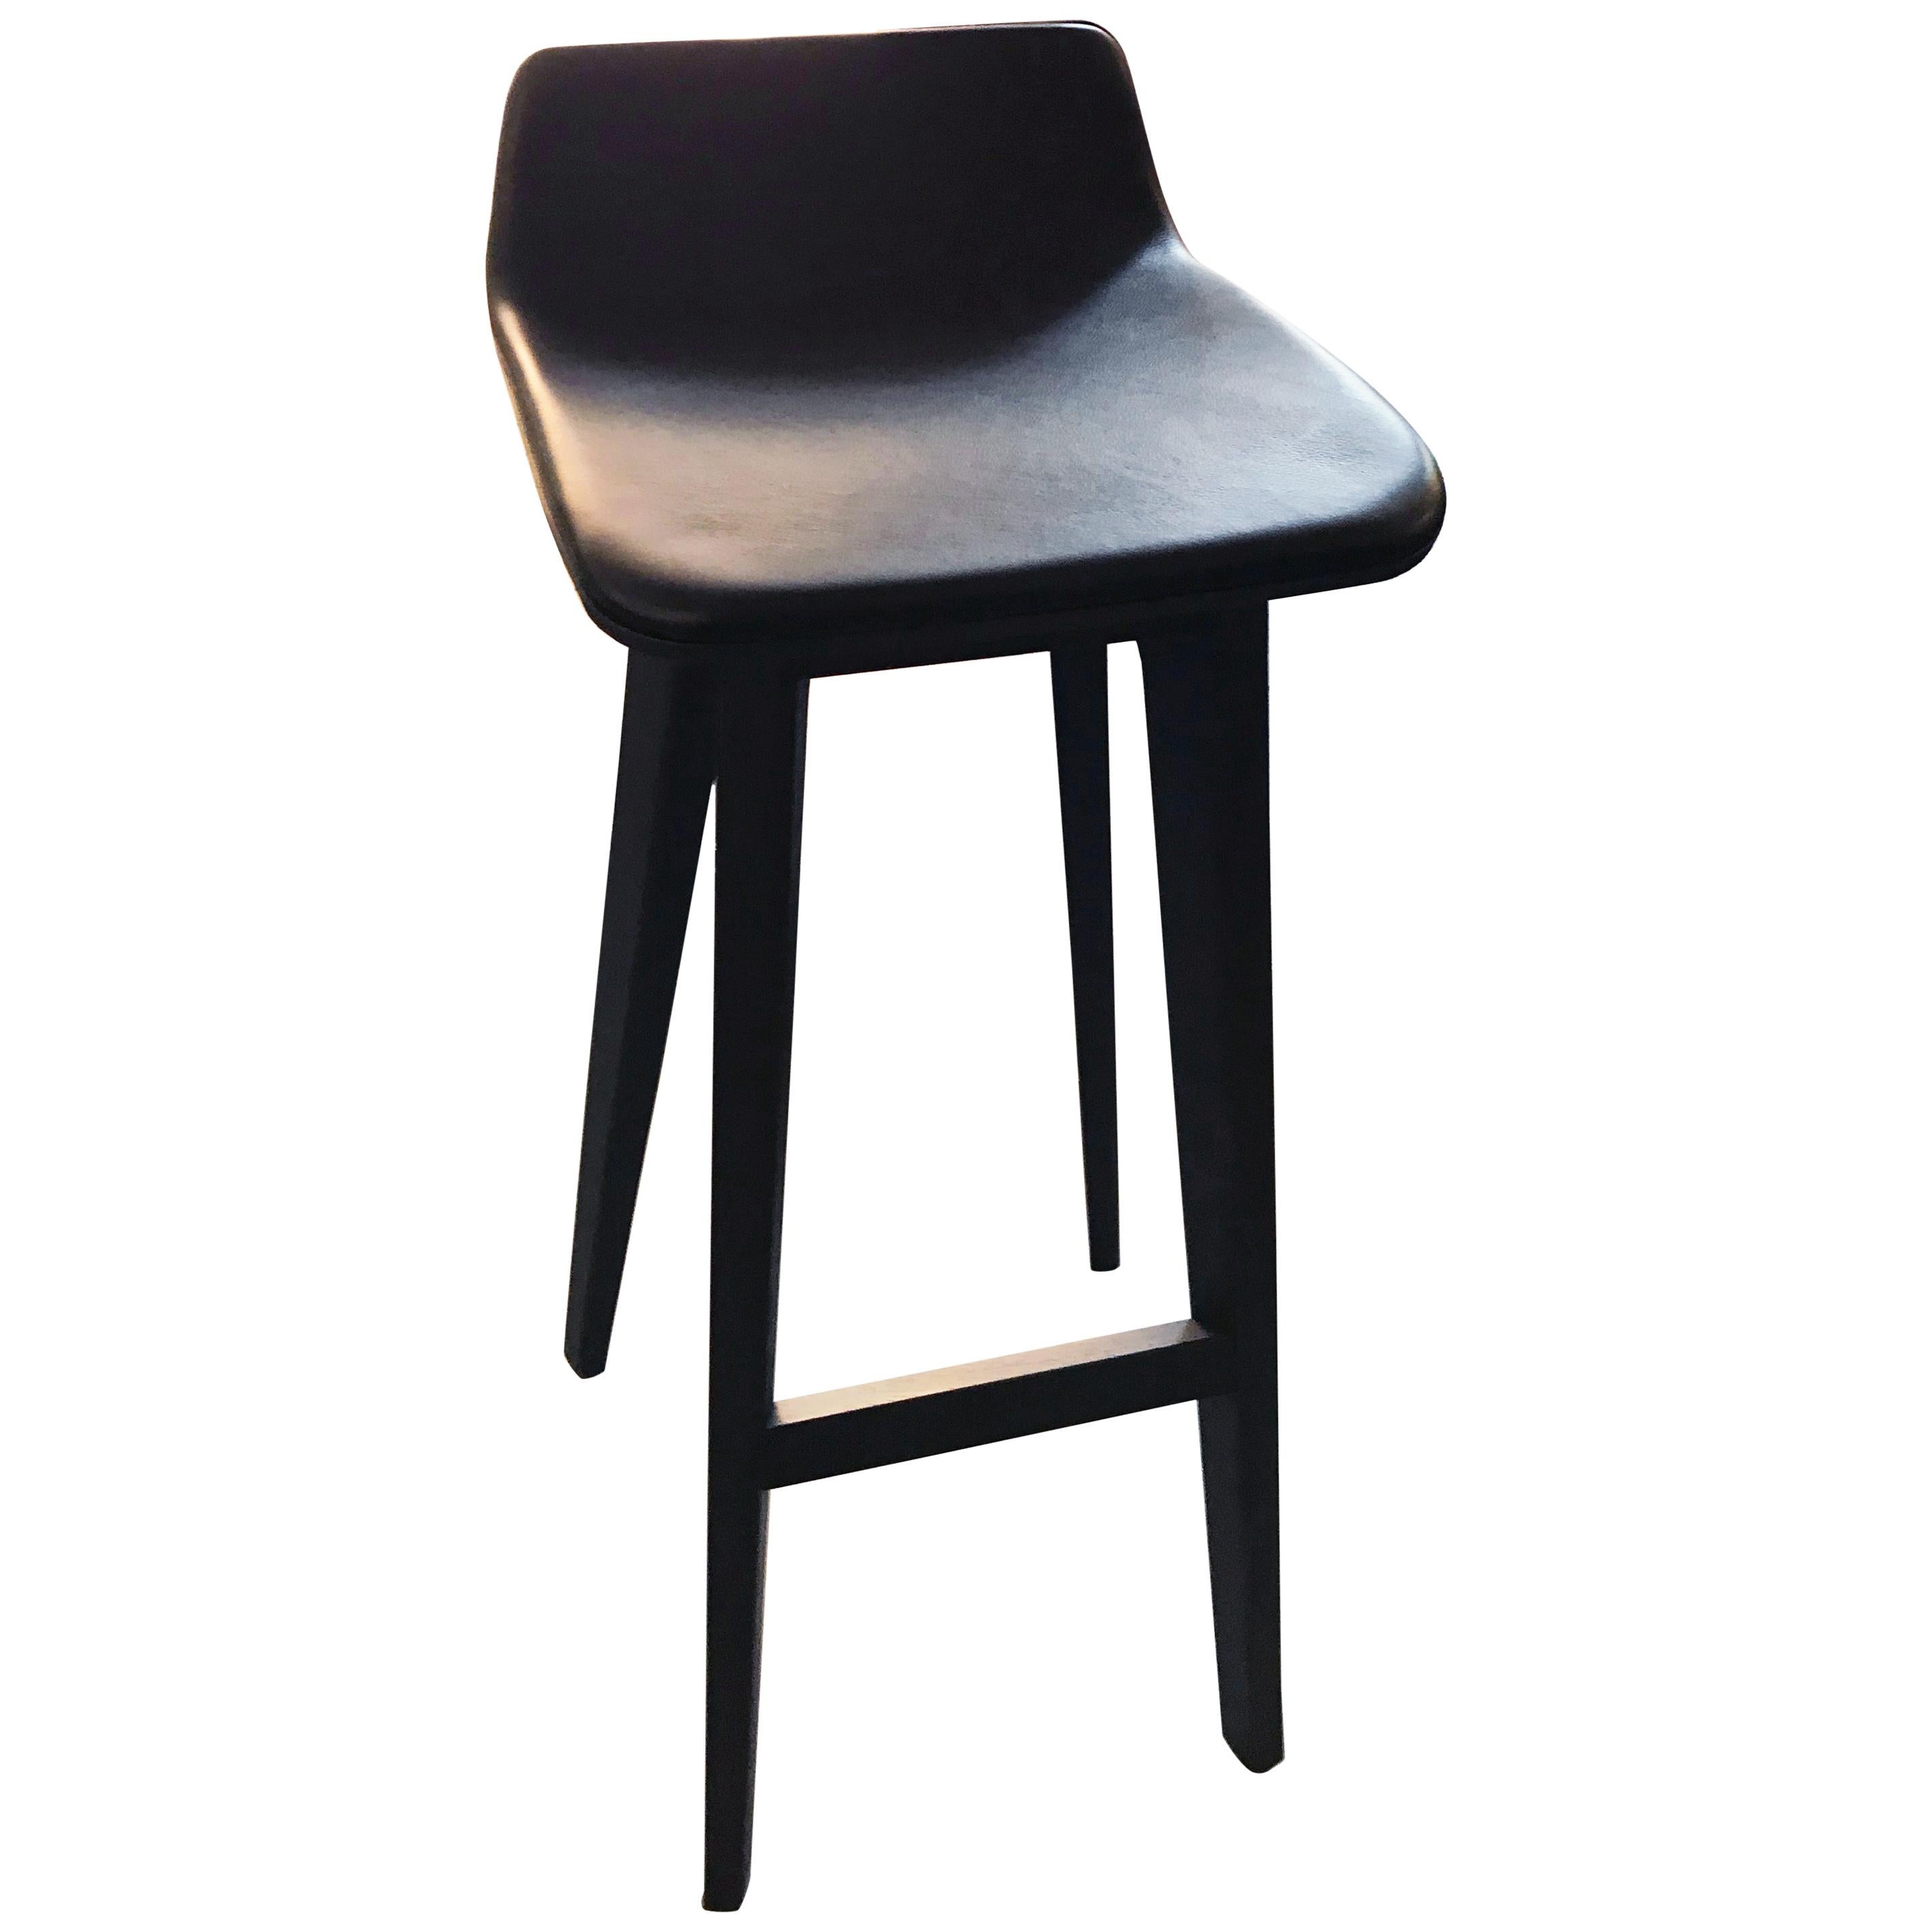 Zeitraum Morph Oak Black Stained Stool with Black Leather Seat